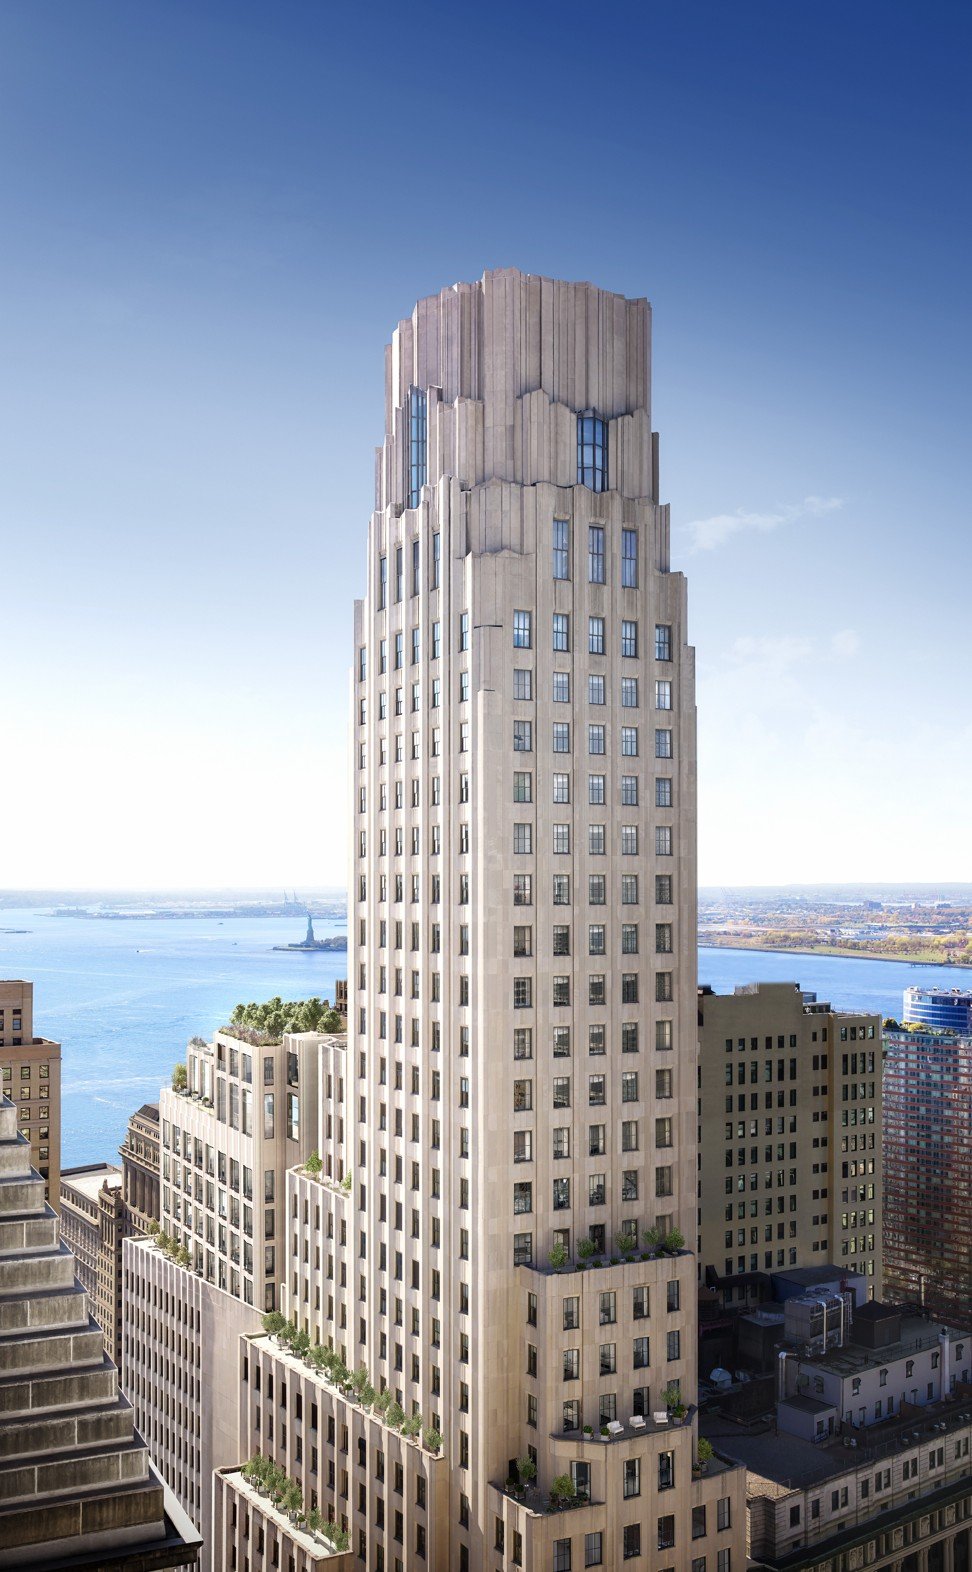 The exterior of the 56-storey art deco building, One Wall Street, in New York, which is being converted in flats and retail space.